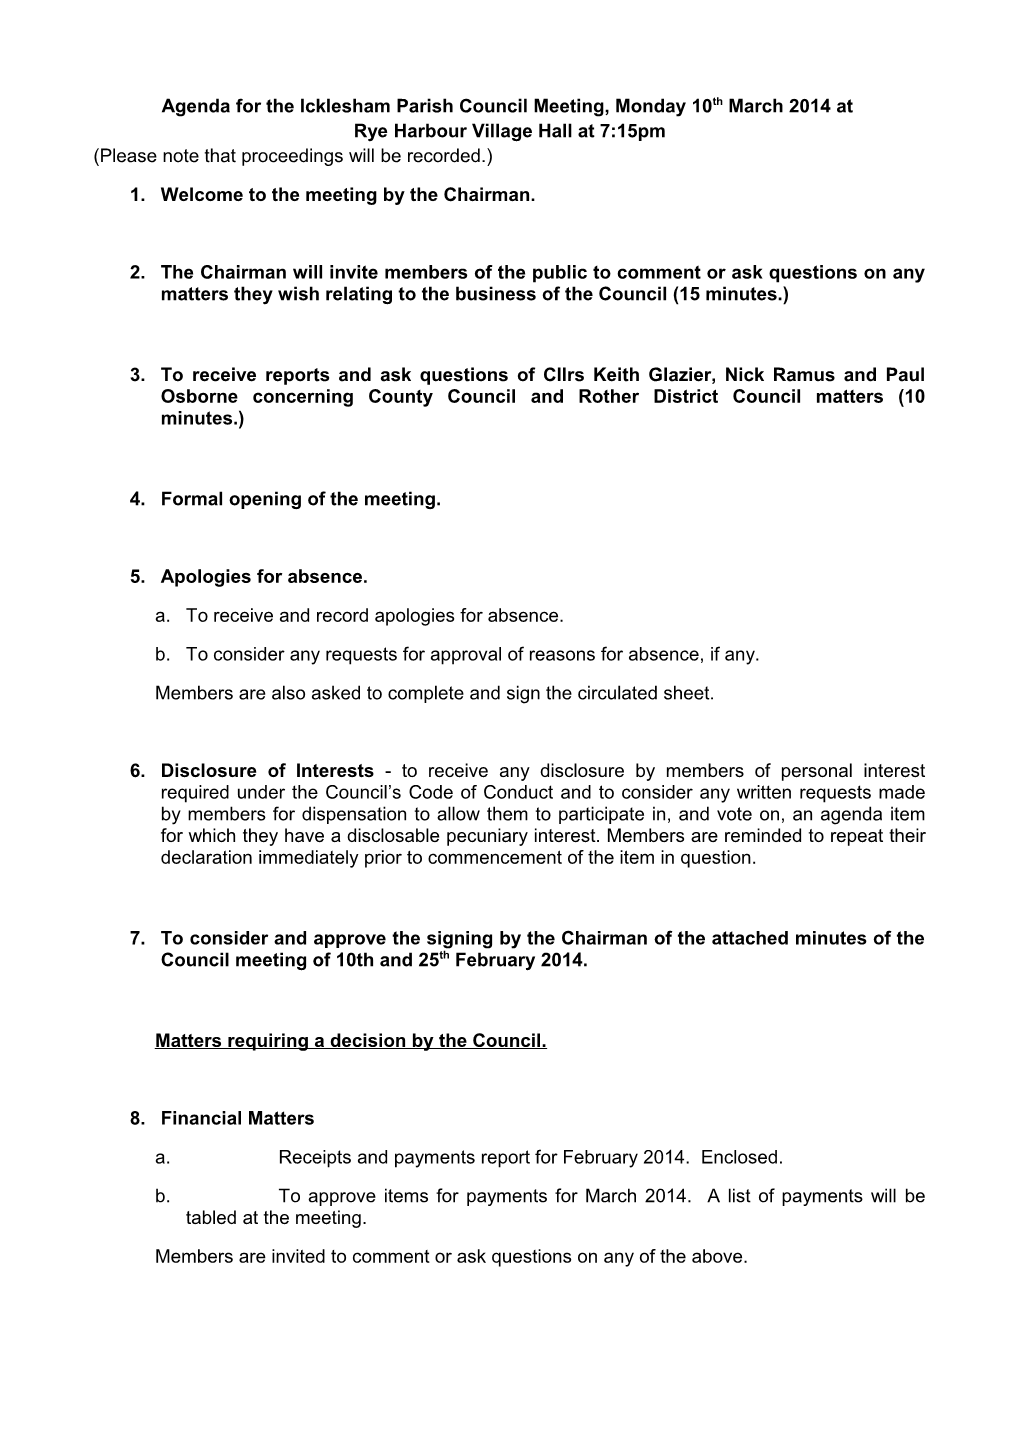 Agenda for the Icklesham Parish Council Meeting, Monday 10Th March 2014 At